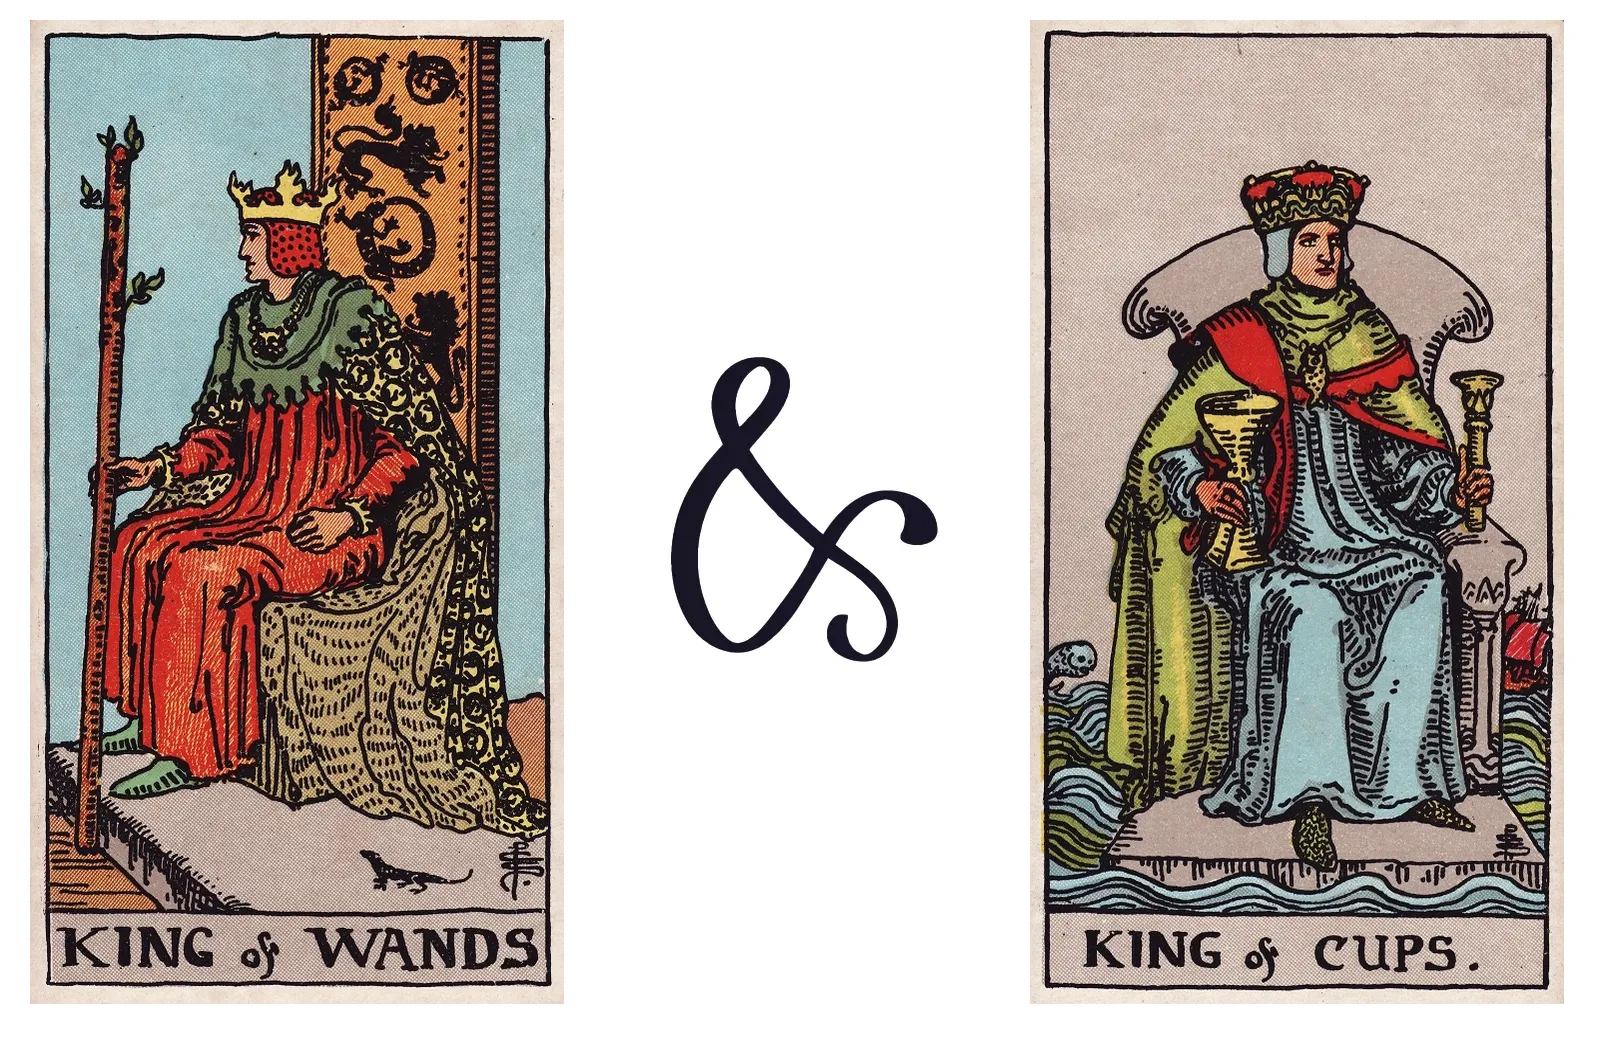 King of Wands and King of Cups